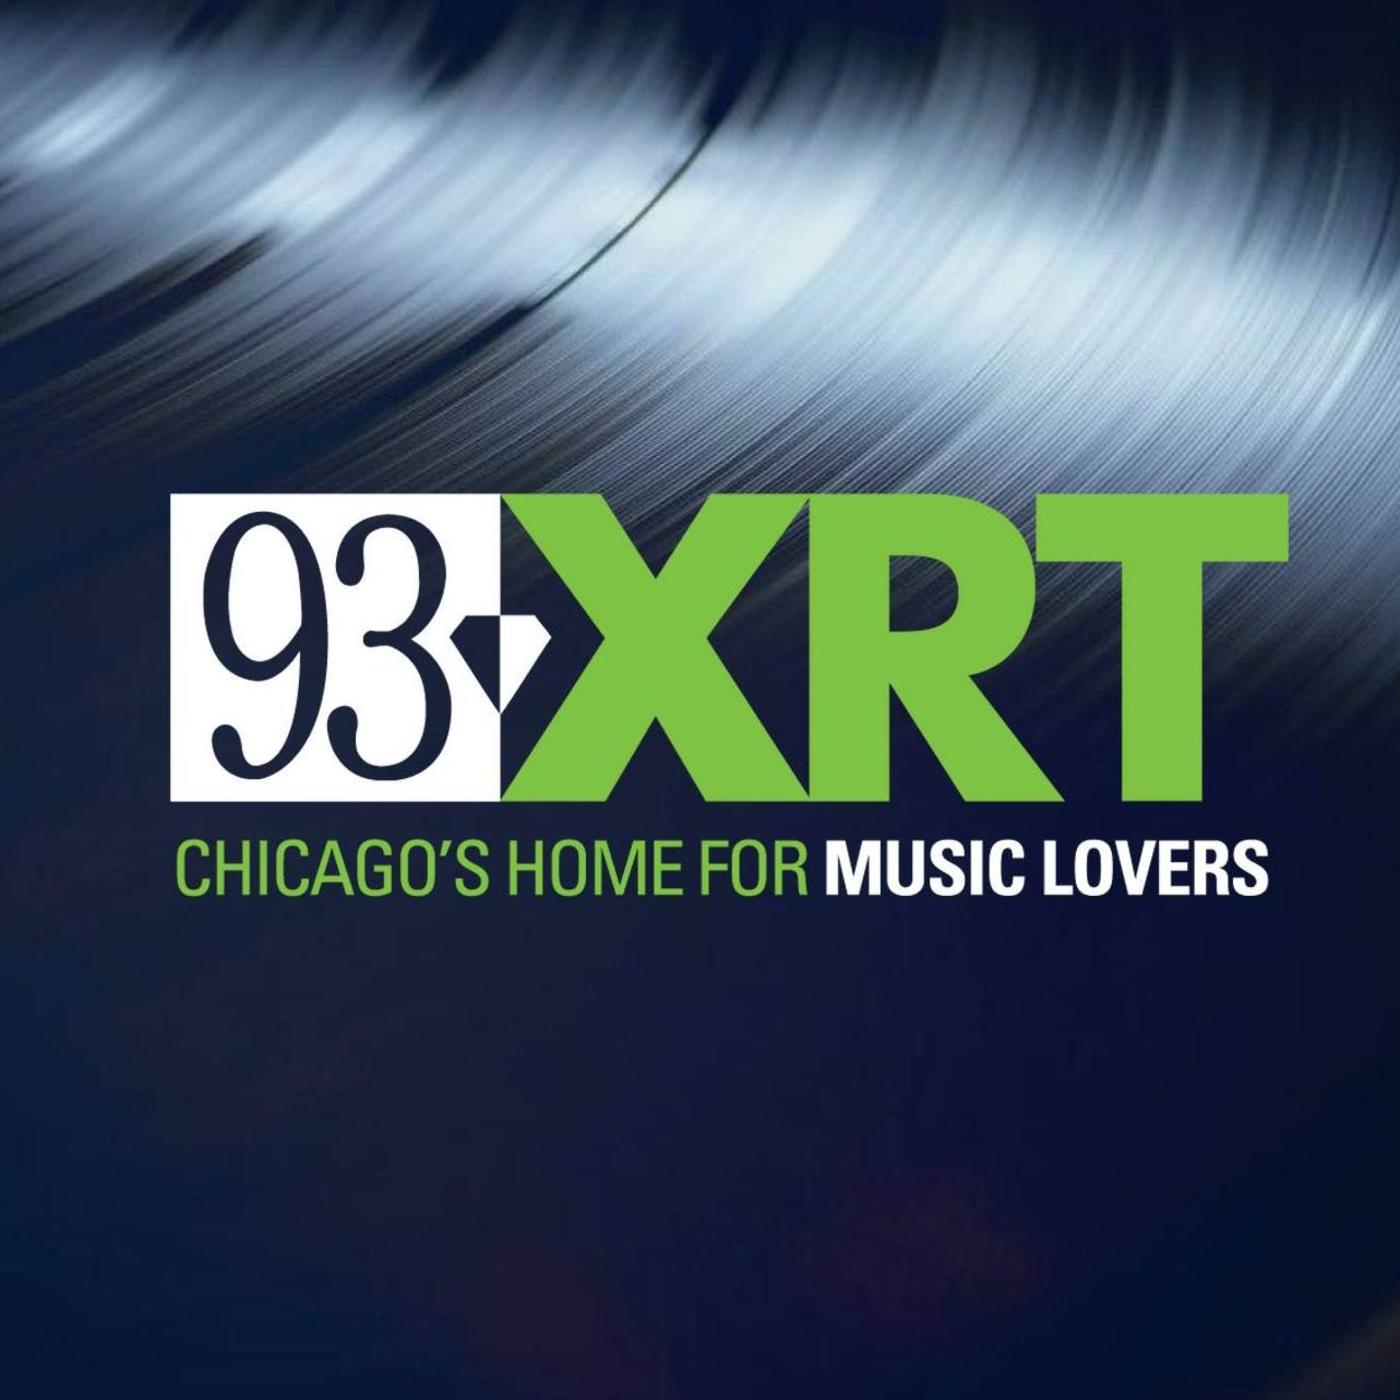 Lin Brehmer Signs Off From The XRT Morning Show